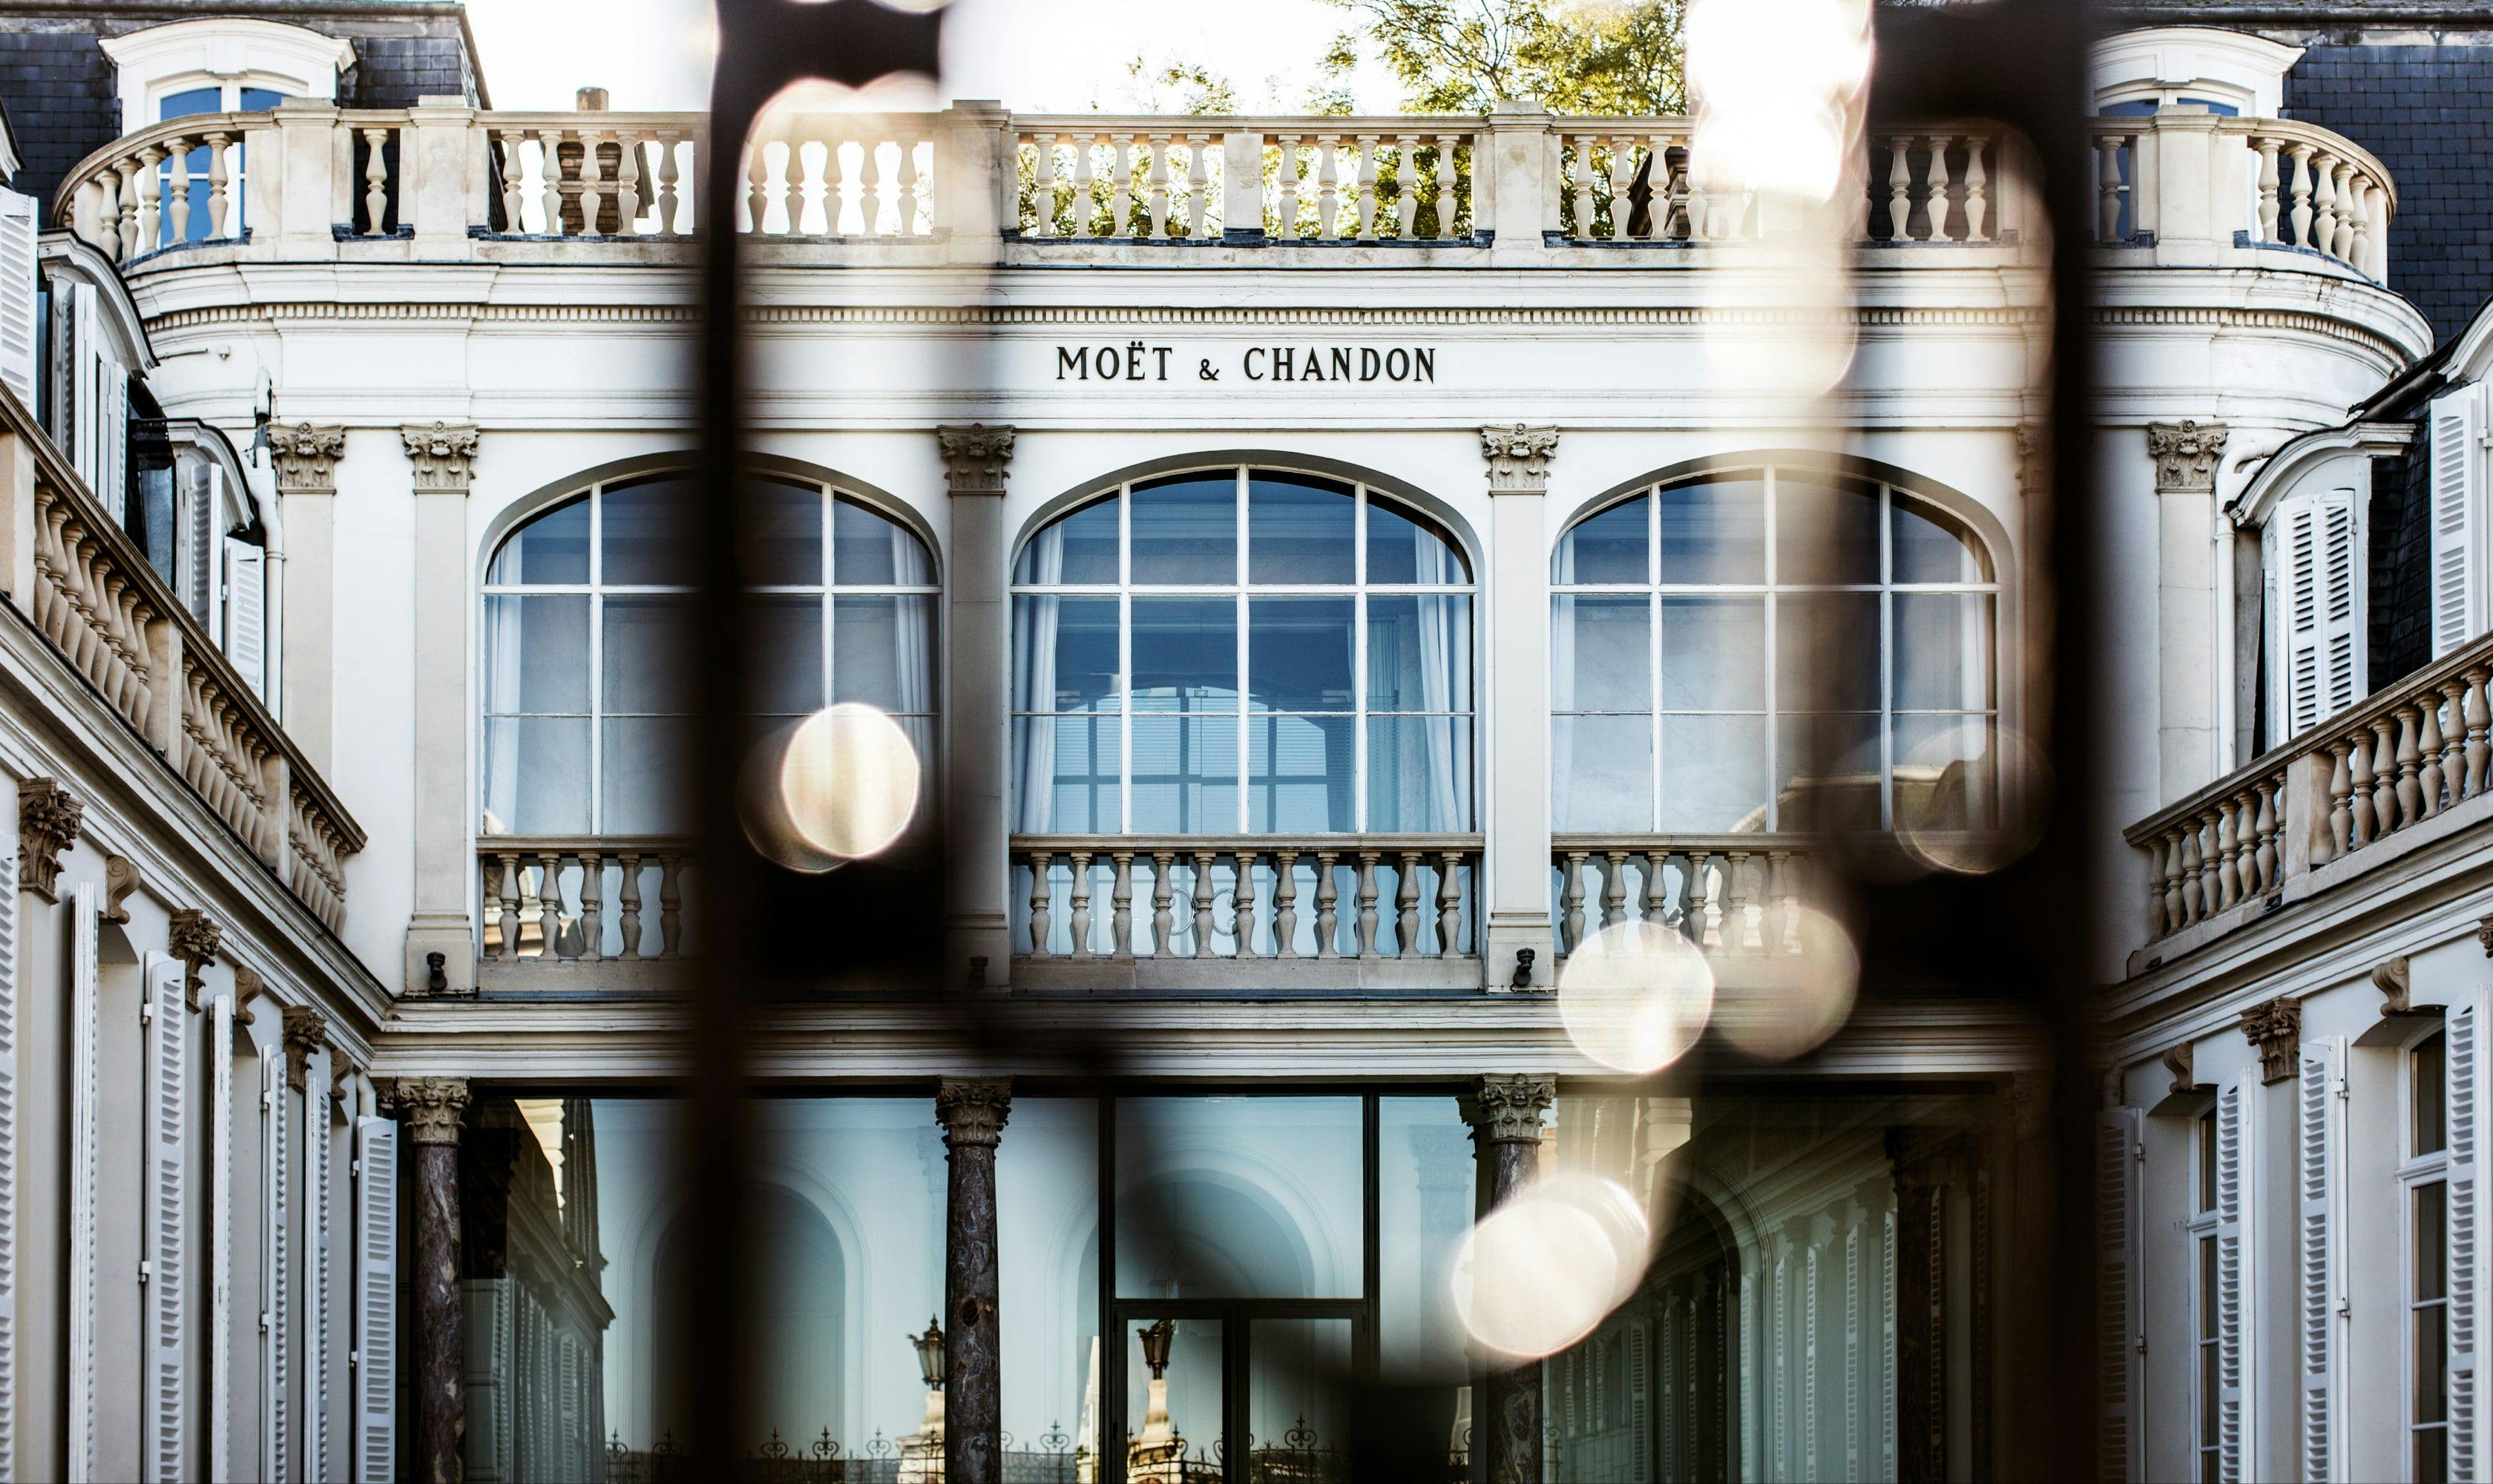 Moët & Chandon champagne house facade in Epernay France.